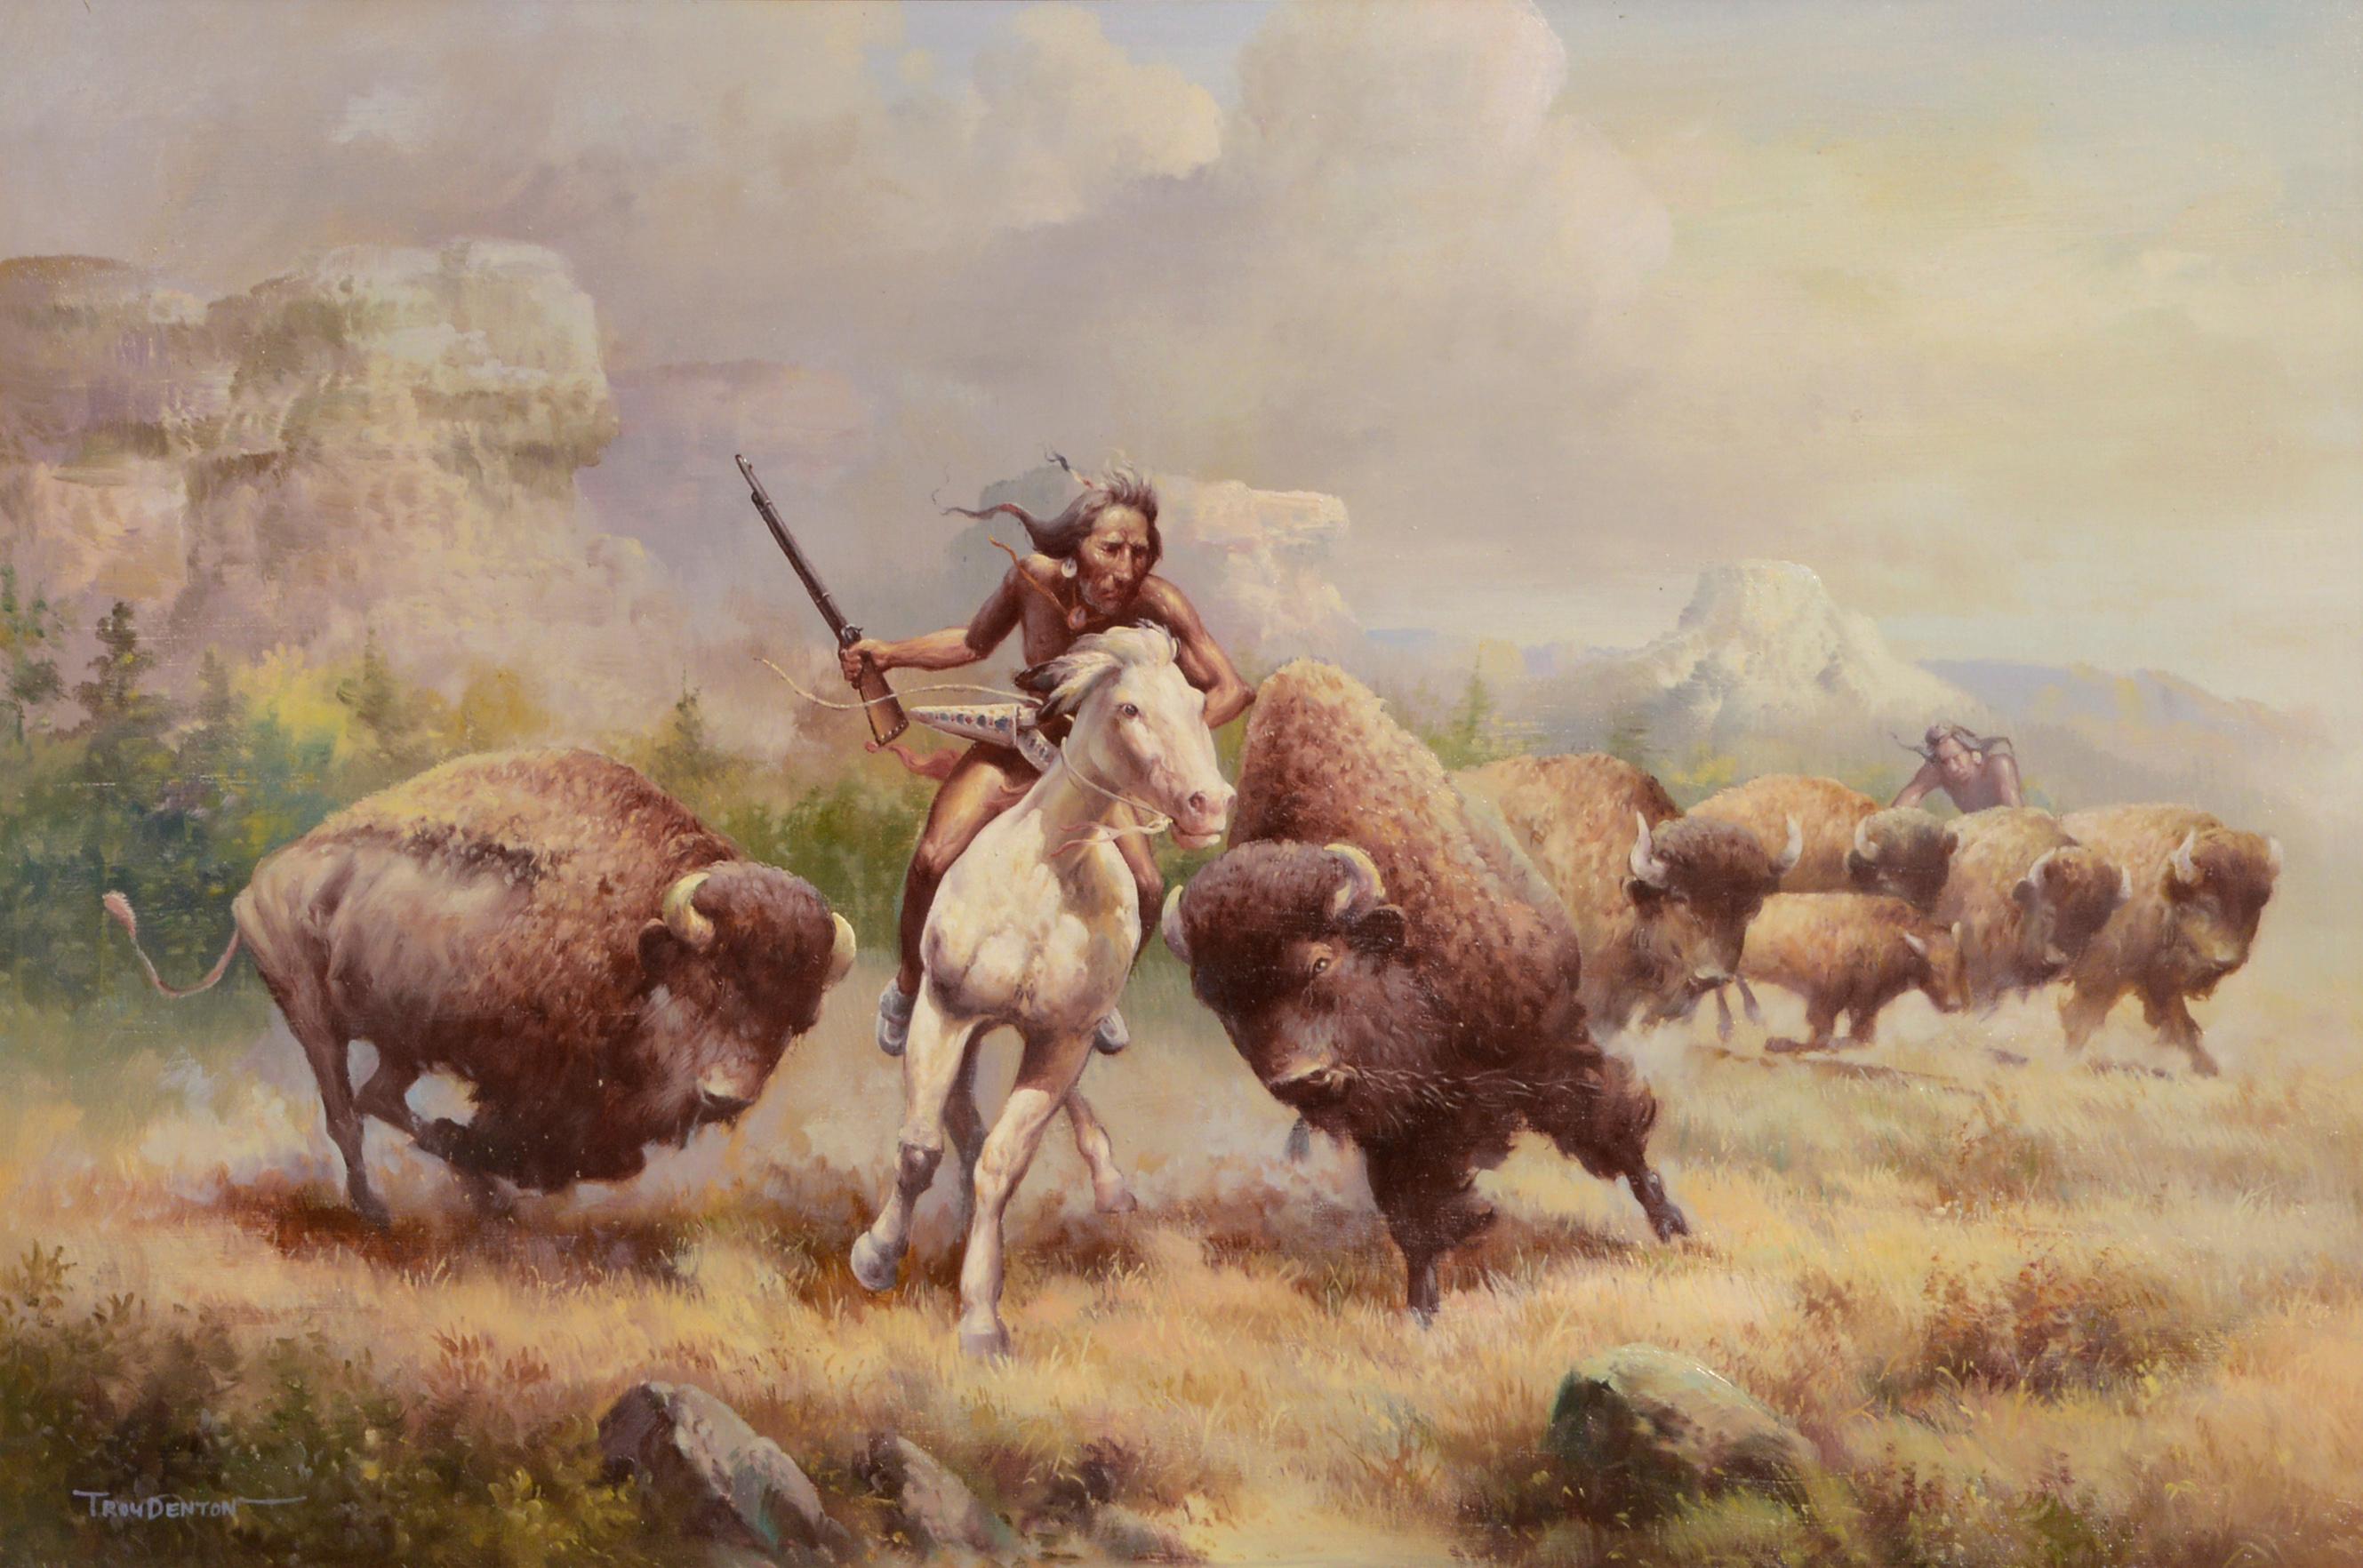 Buffalo Hunt with Rifle, Realist Figurative Landscape  - Painting by Troy Denton